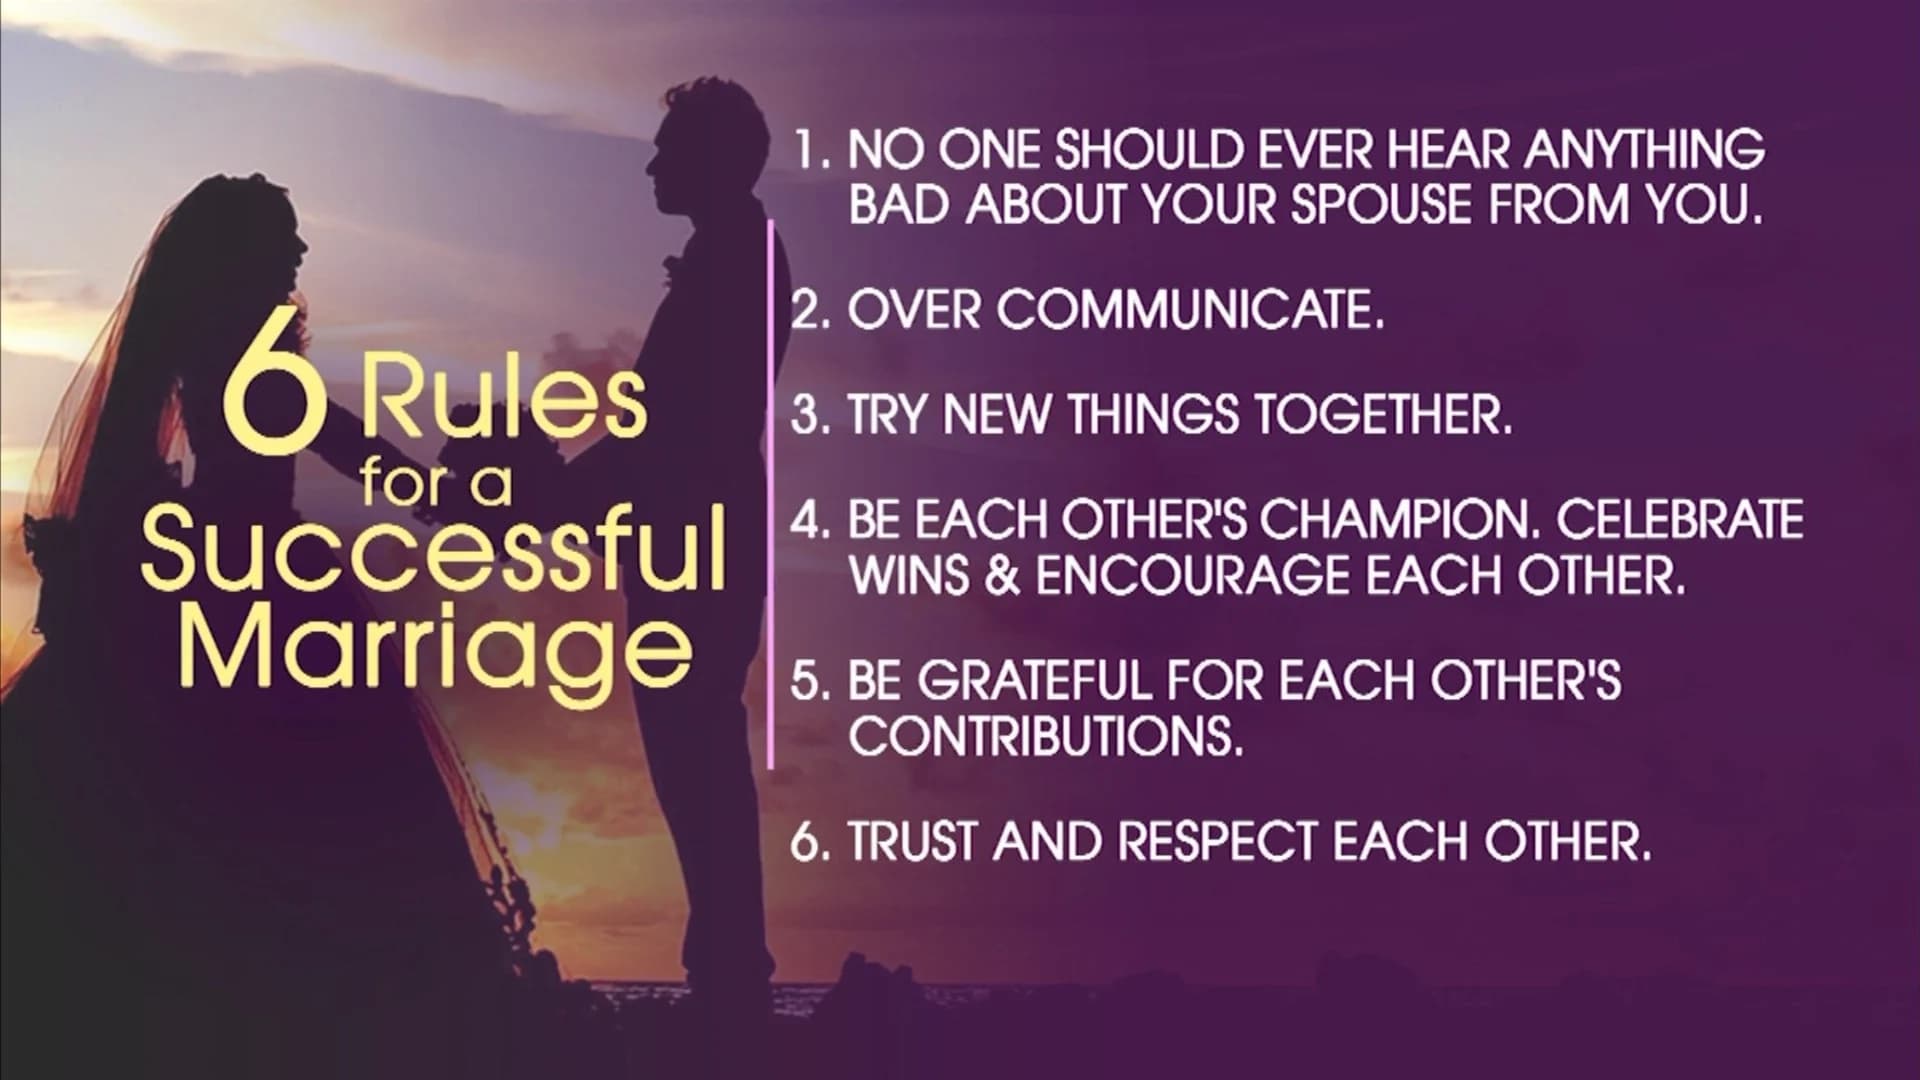 Couple’s Twitter thread about rules for a successful marriage goes viral